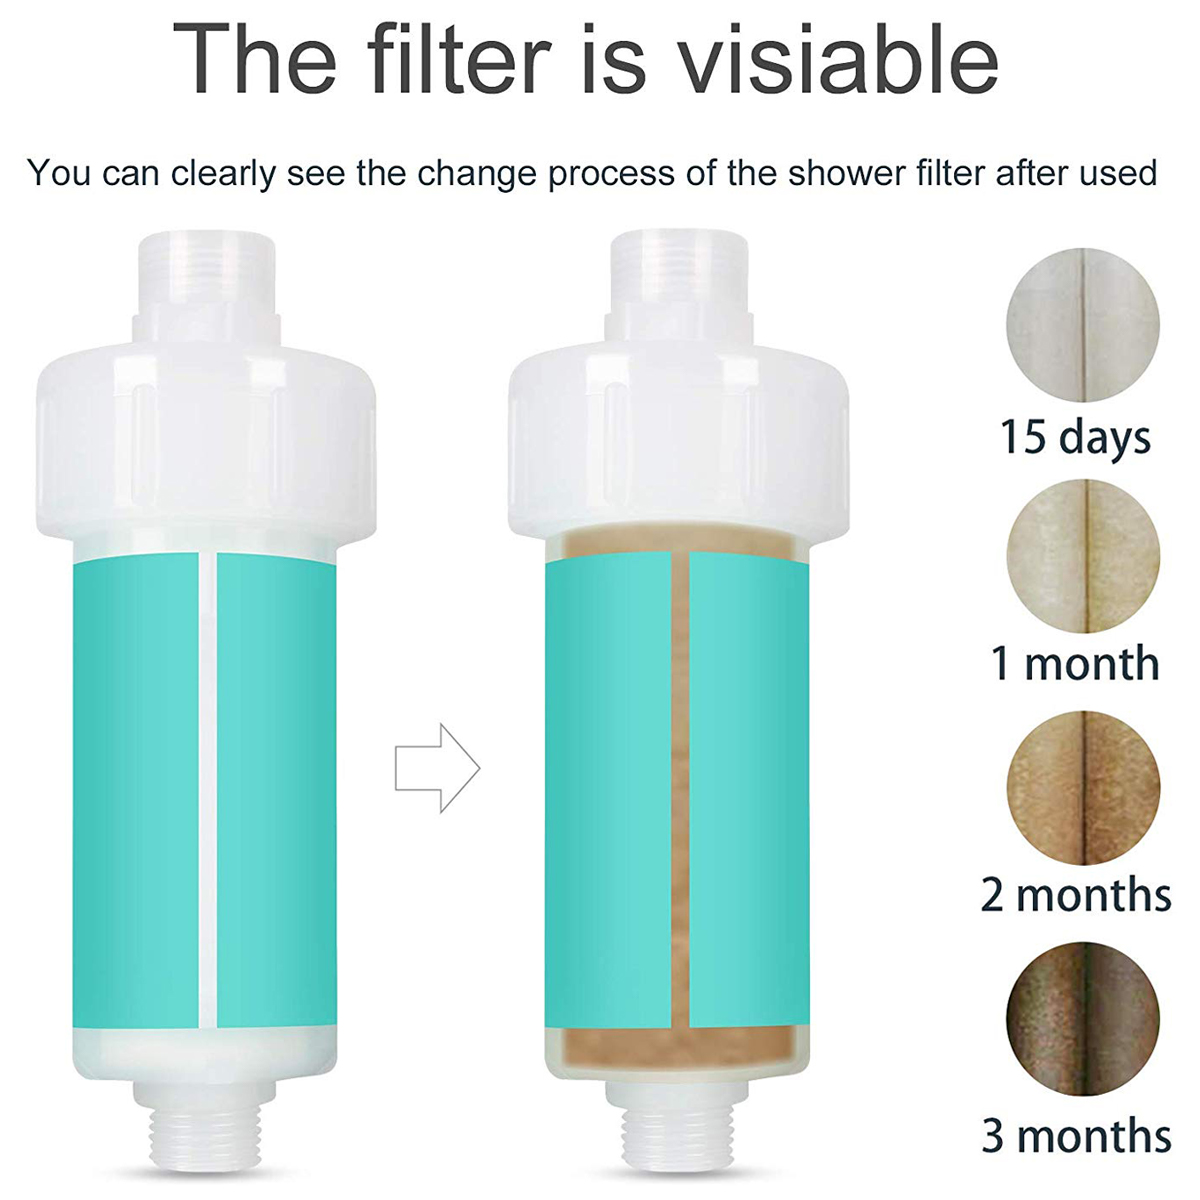 Bathroom Shower Filter Herb Scent SPA Water Purifier - Chlorine Removal Water Softener - Reduces Dry Itchy Skin,Dandruff,Eczema